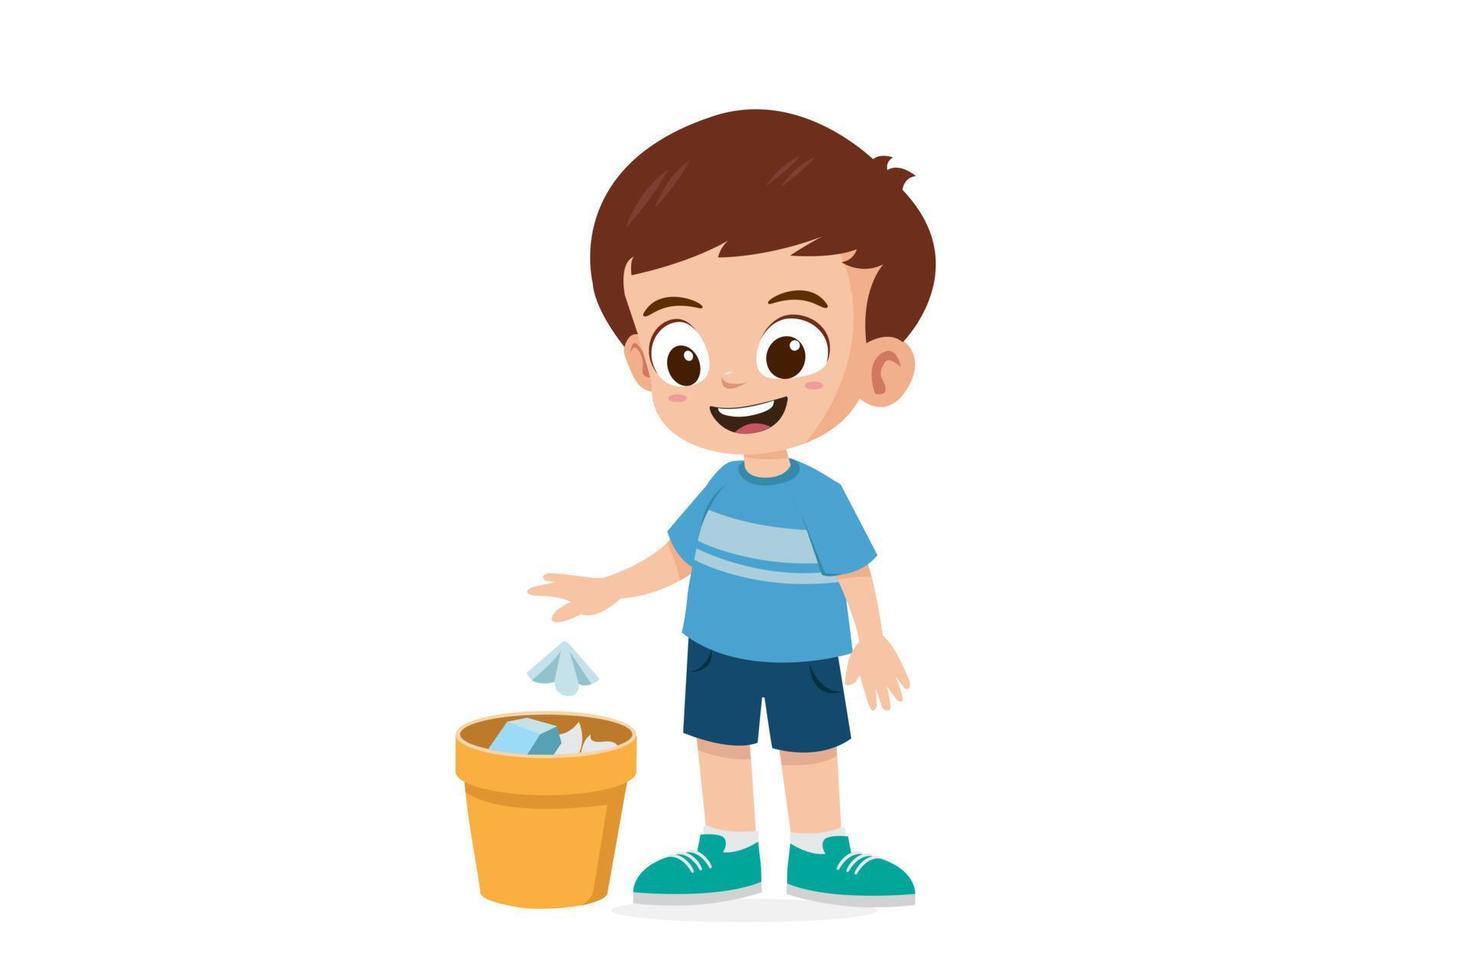 Cute little boy throwing tissue in the trash can vector illustration